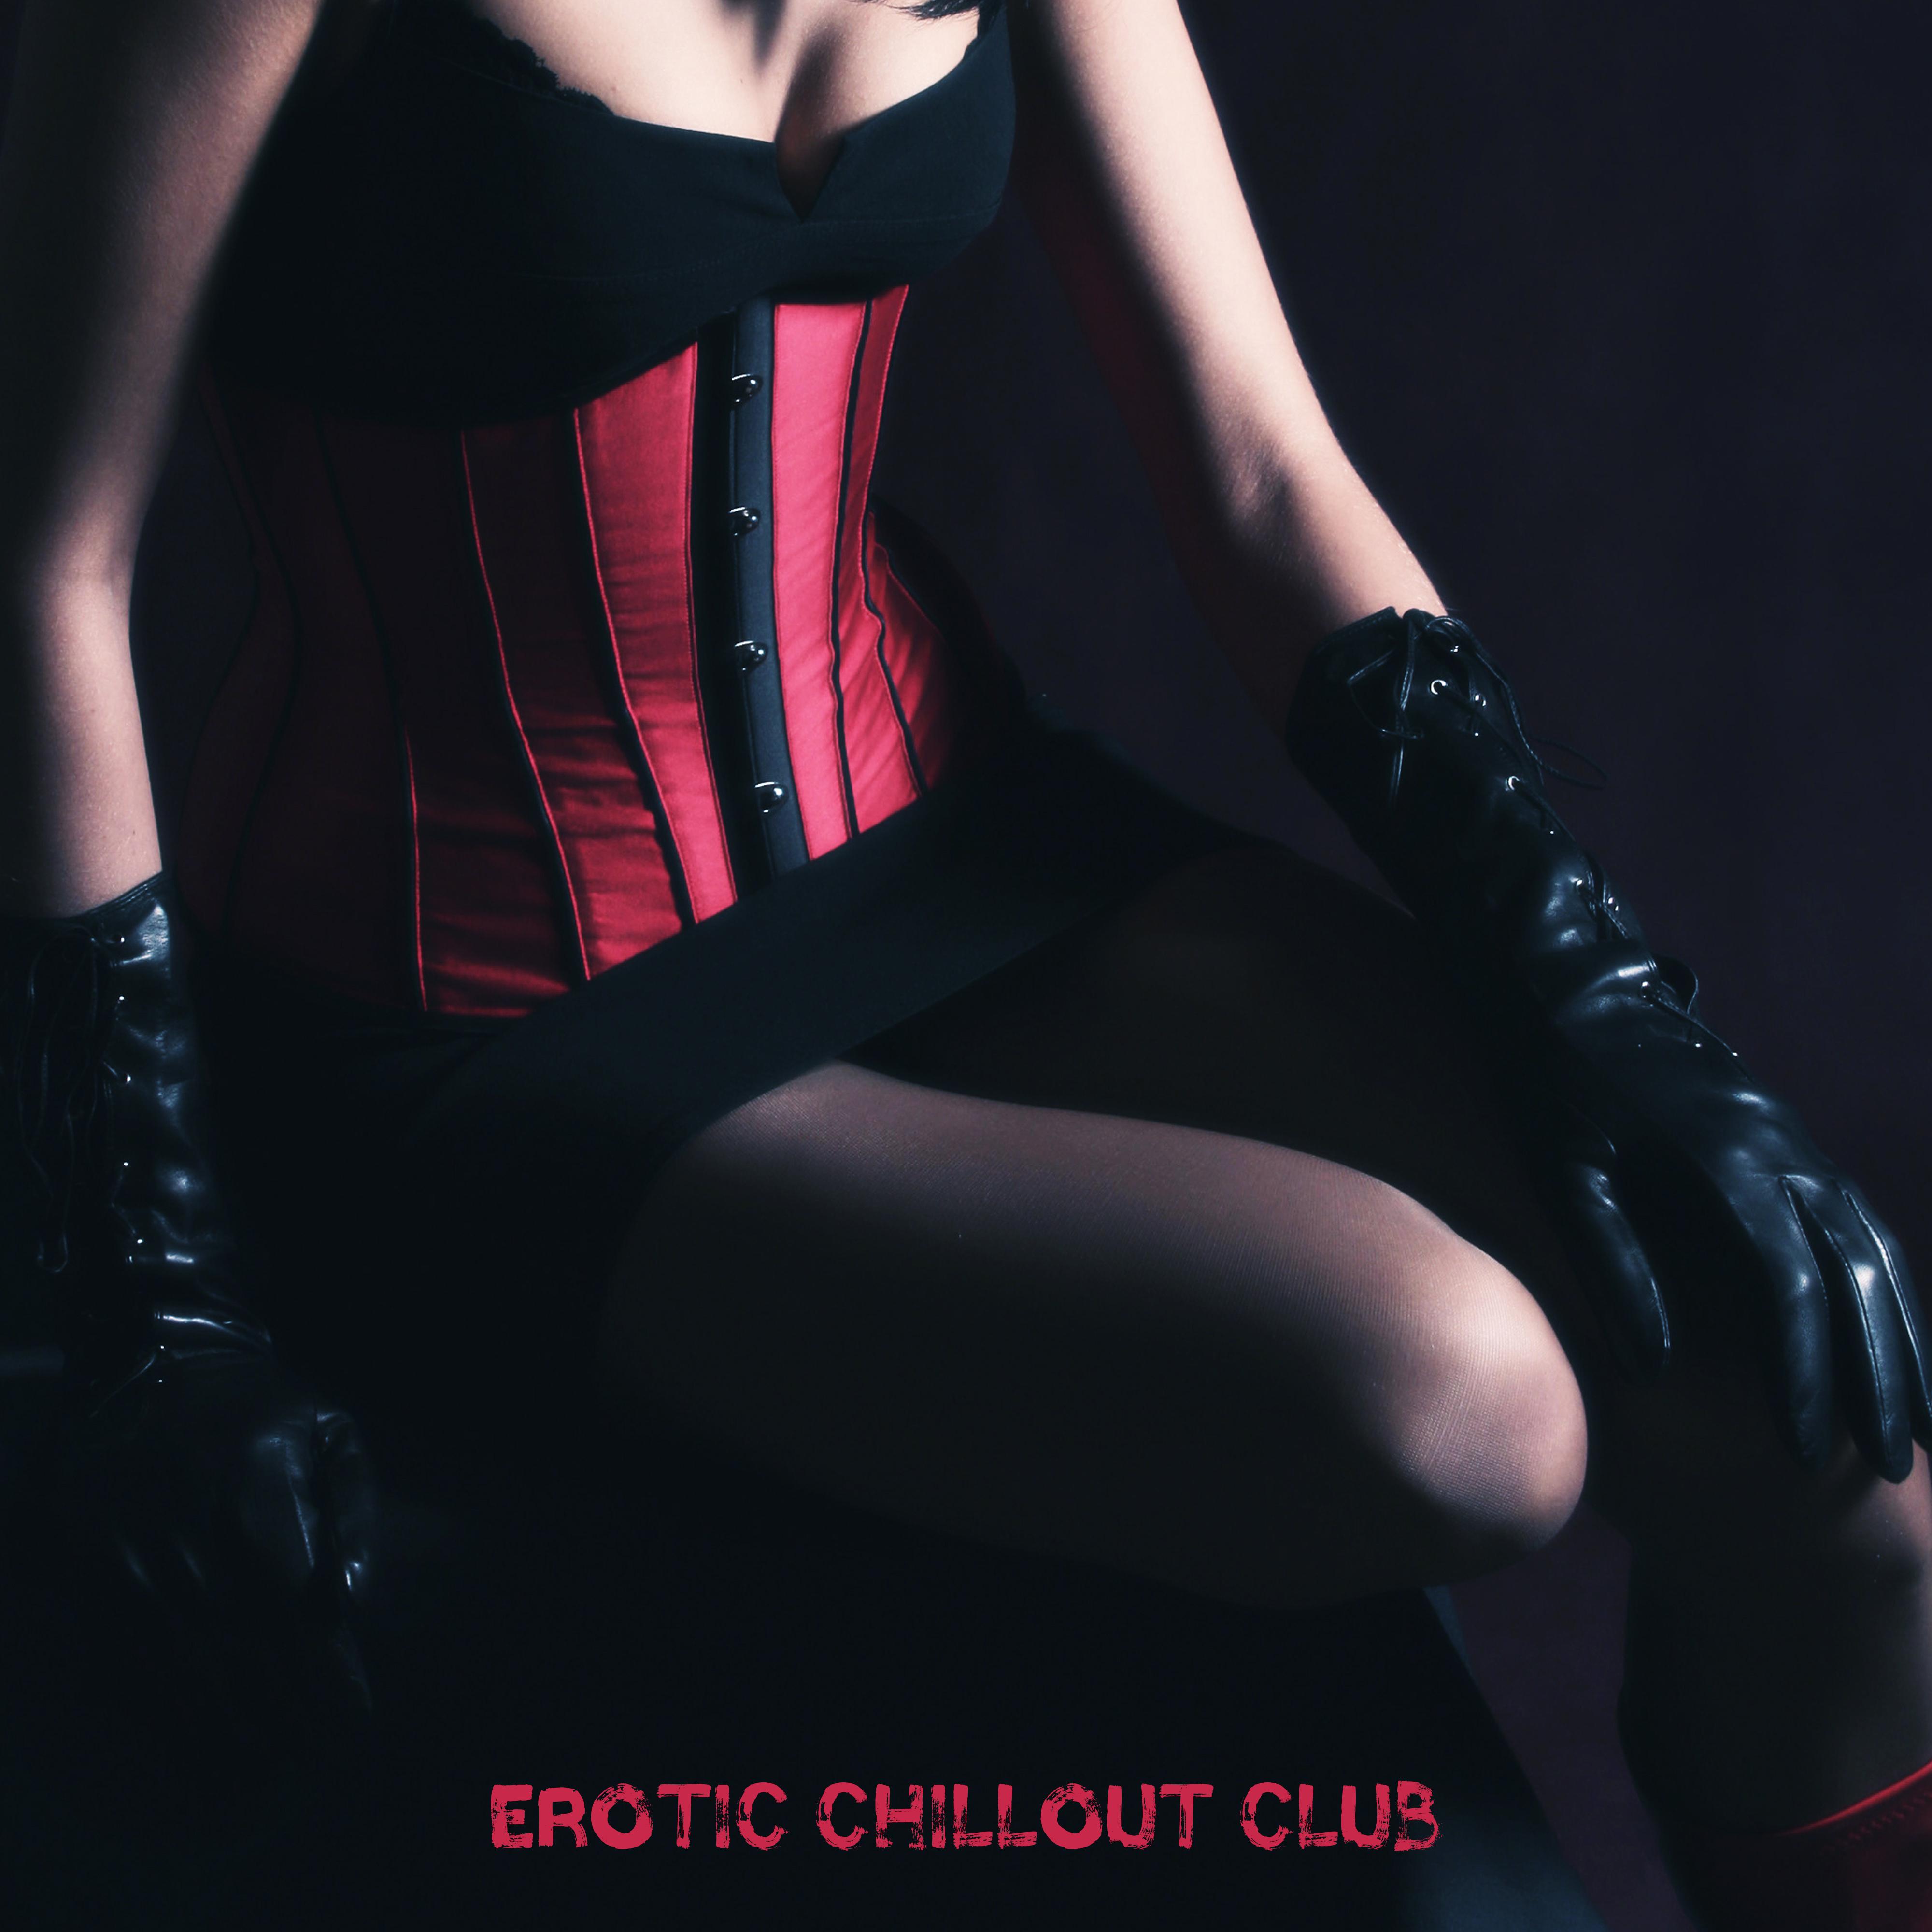 Erotic Chillout Club - Titillating Music, Erotic Vibes, ****** Ecstasy, *** Music, Making Love, Sensual Dance, Bedroom Beats, Strong Desire